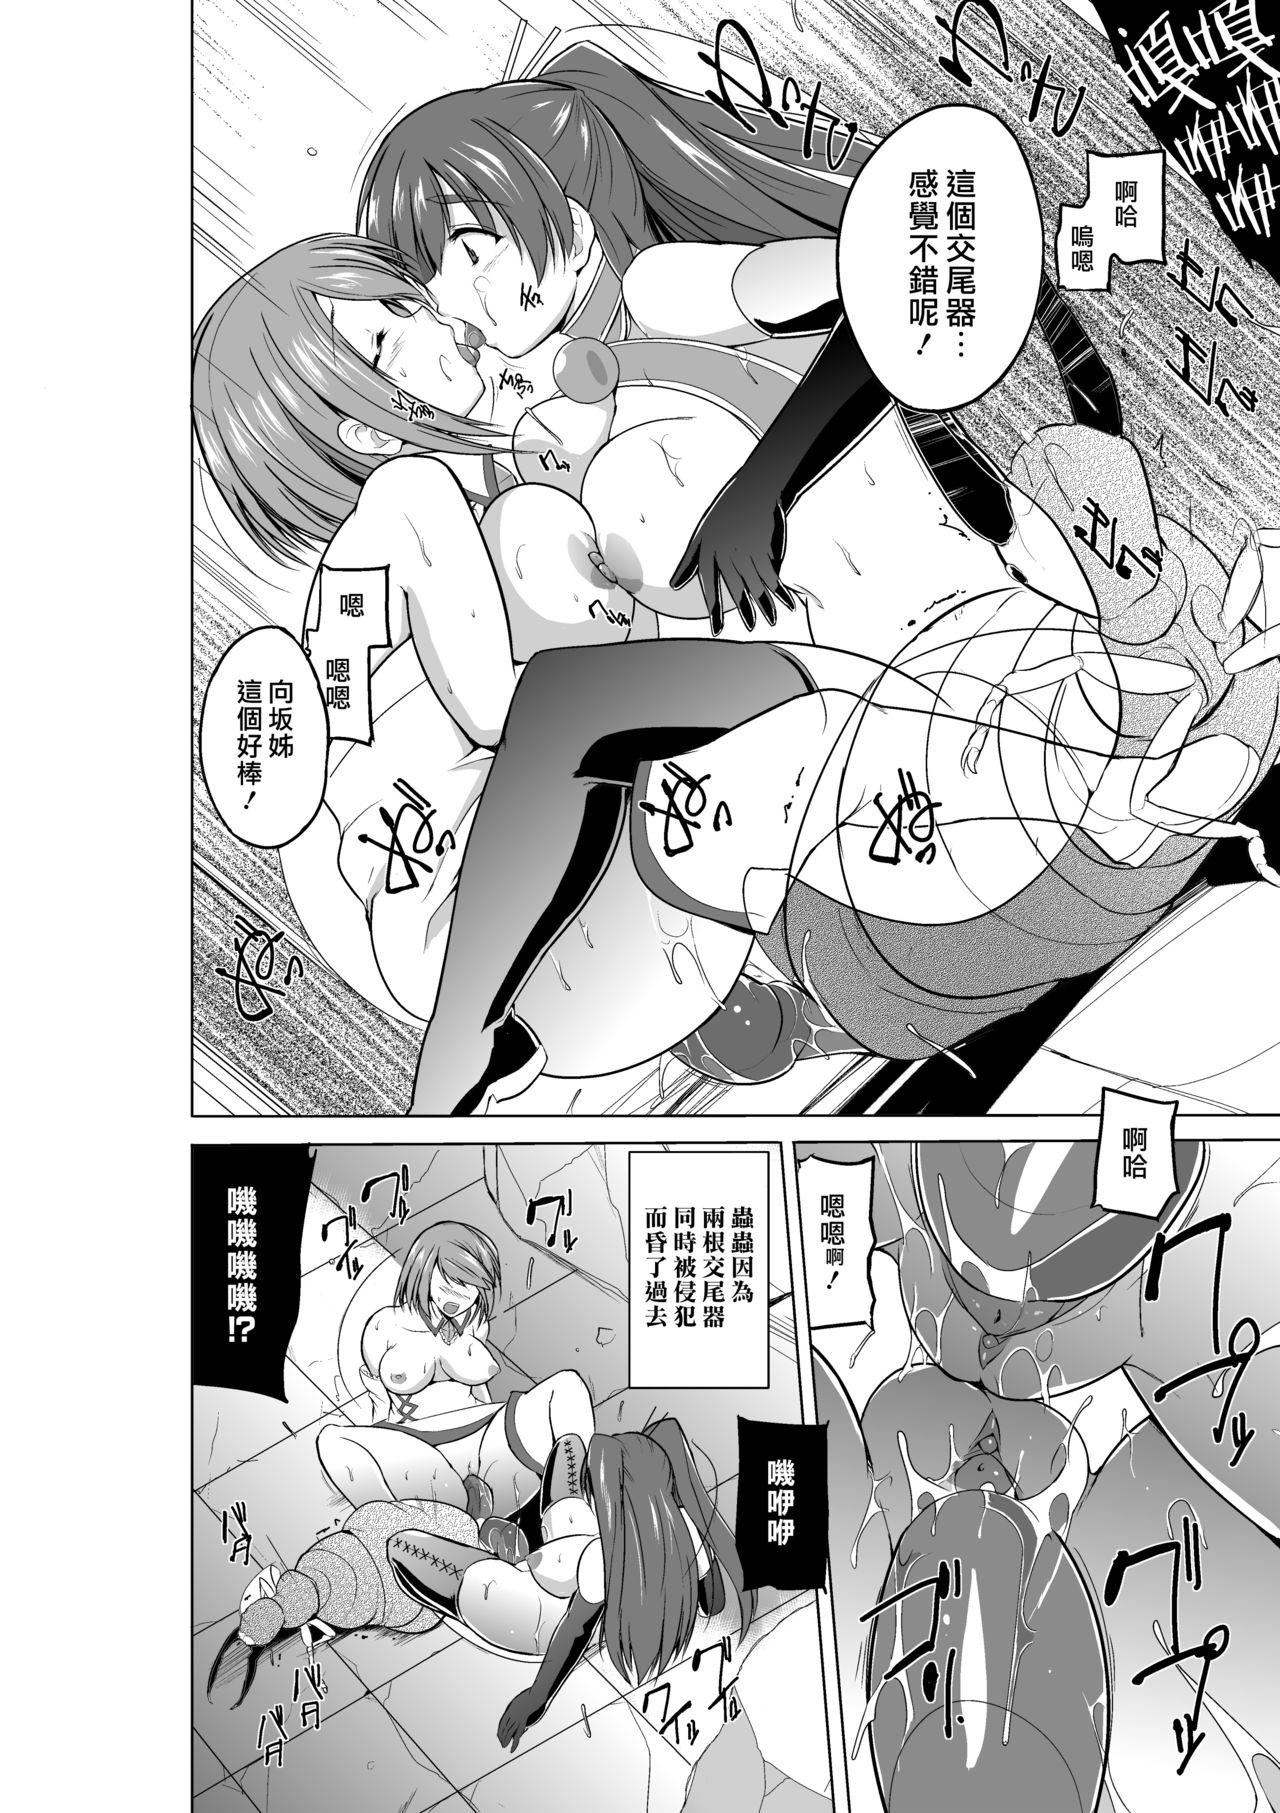 Doggystyle Porn Dungeon Travelers Minna no Oyuugi - Toheart2 Cop - Page 8